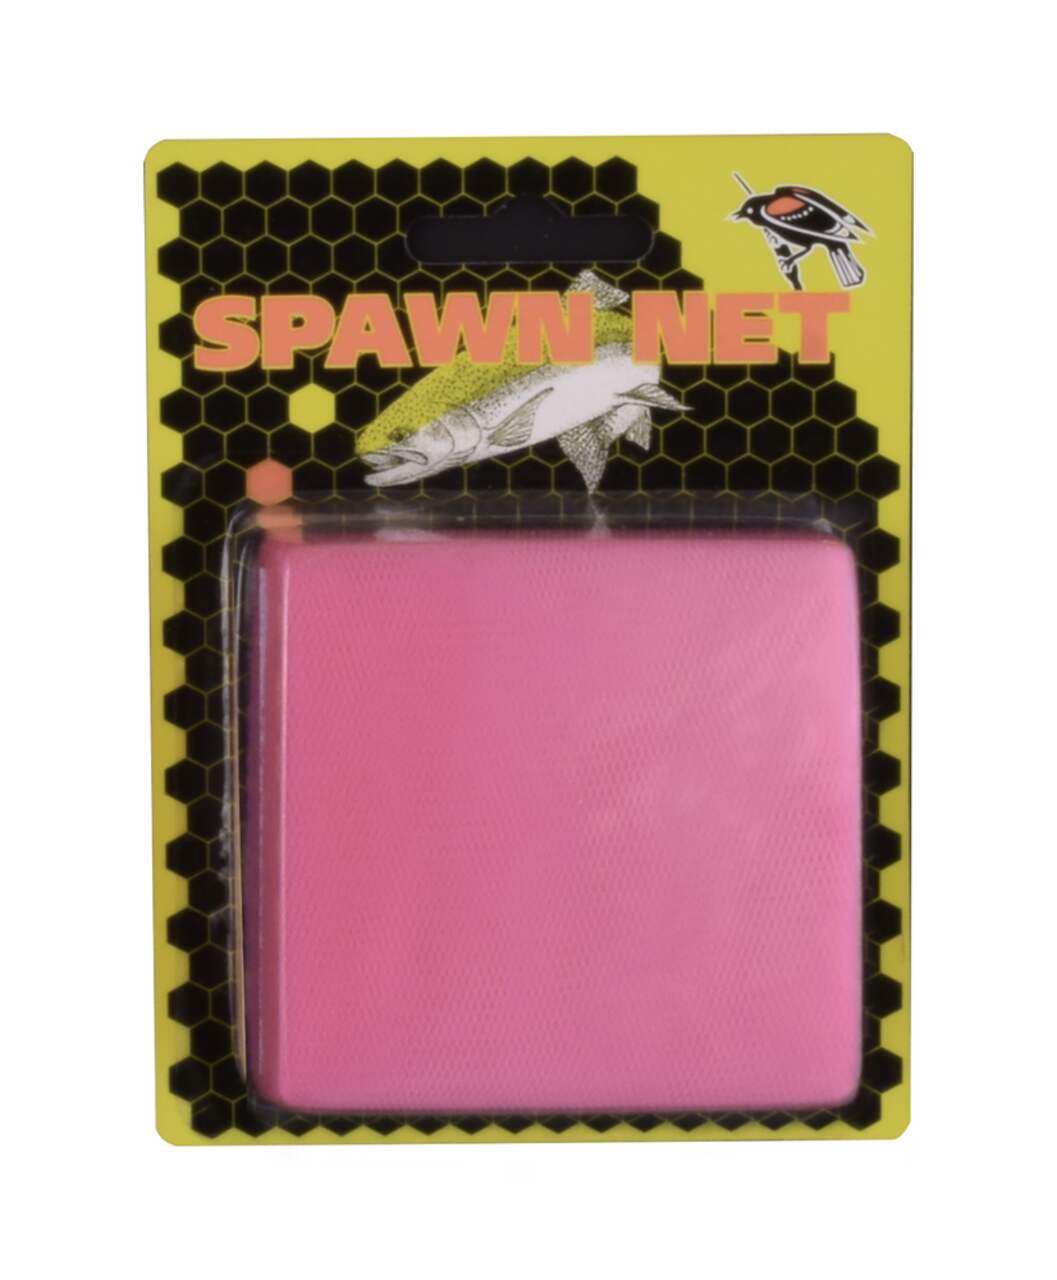 https://media-www.canadiantire.ca/product/playing/fishing/fishing-lures/1782367/redwing-spawn-net-hot-pink-80f090fc-d73a-4351-b263-01e70291941a.png?imdensity=1&imwidth=1244&impolicy=mZoom